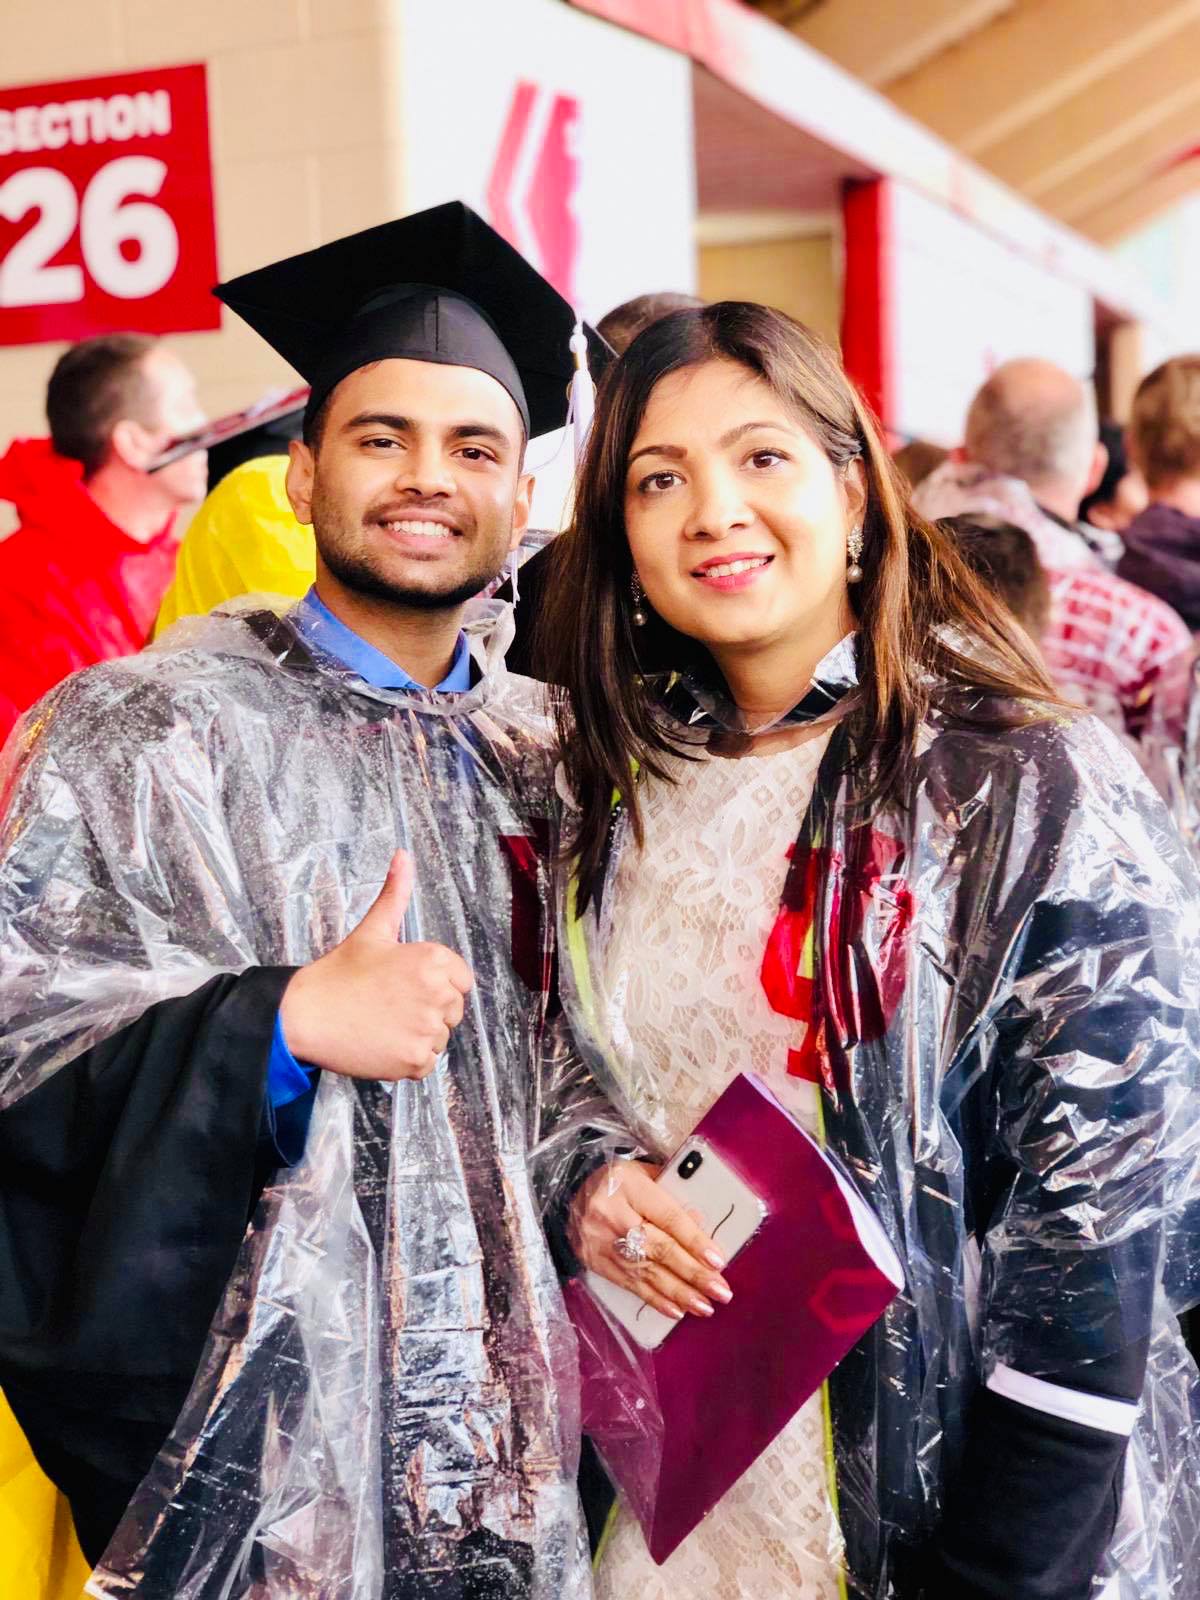 Ashutosh-and-mother-at-graduation-in-ponchos.jpg